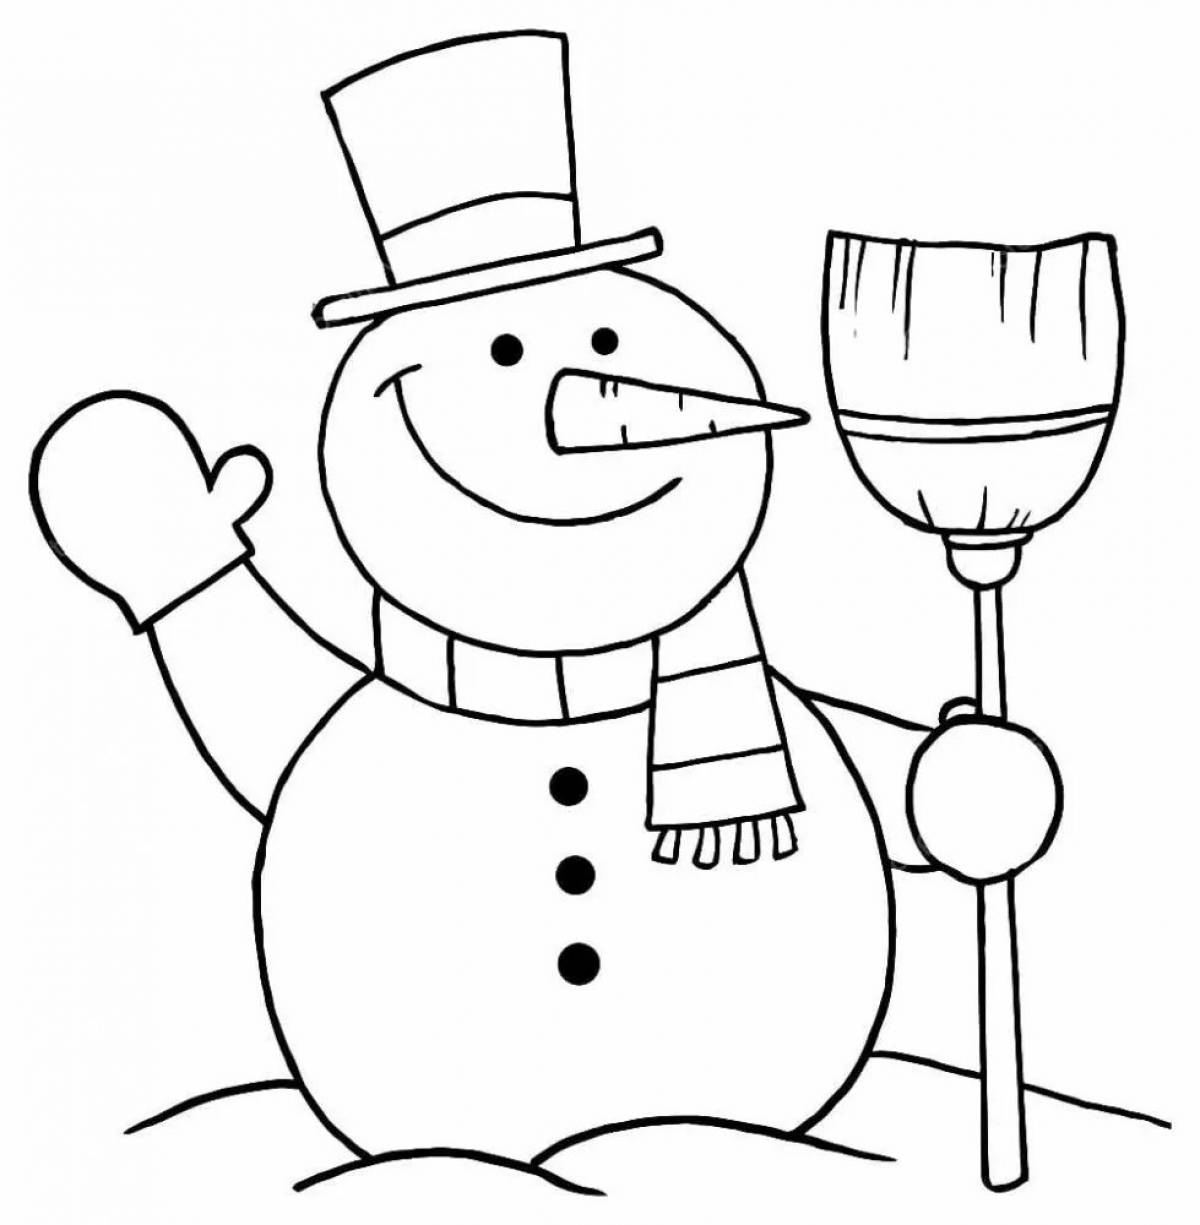 Great coloring book snowman with a broom